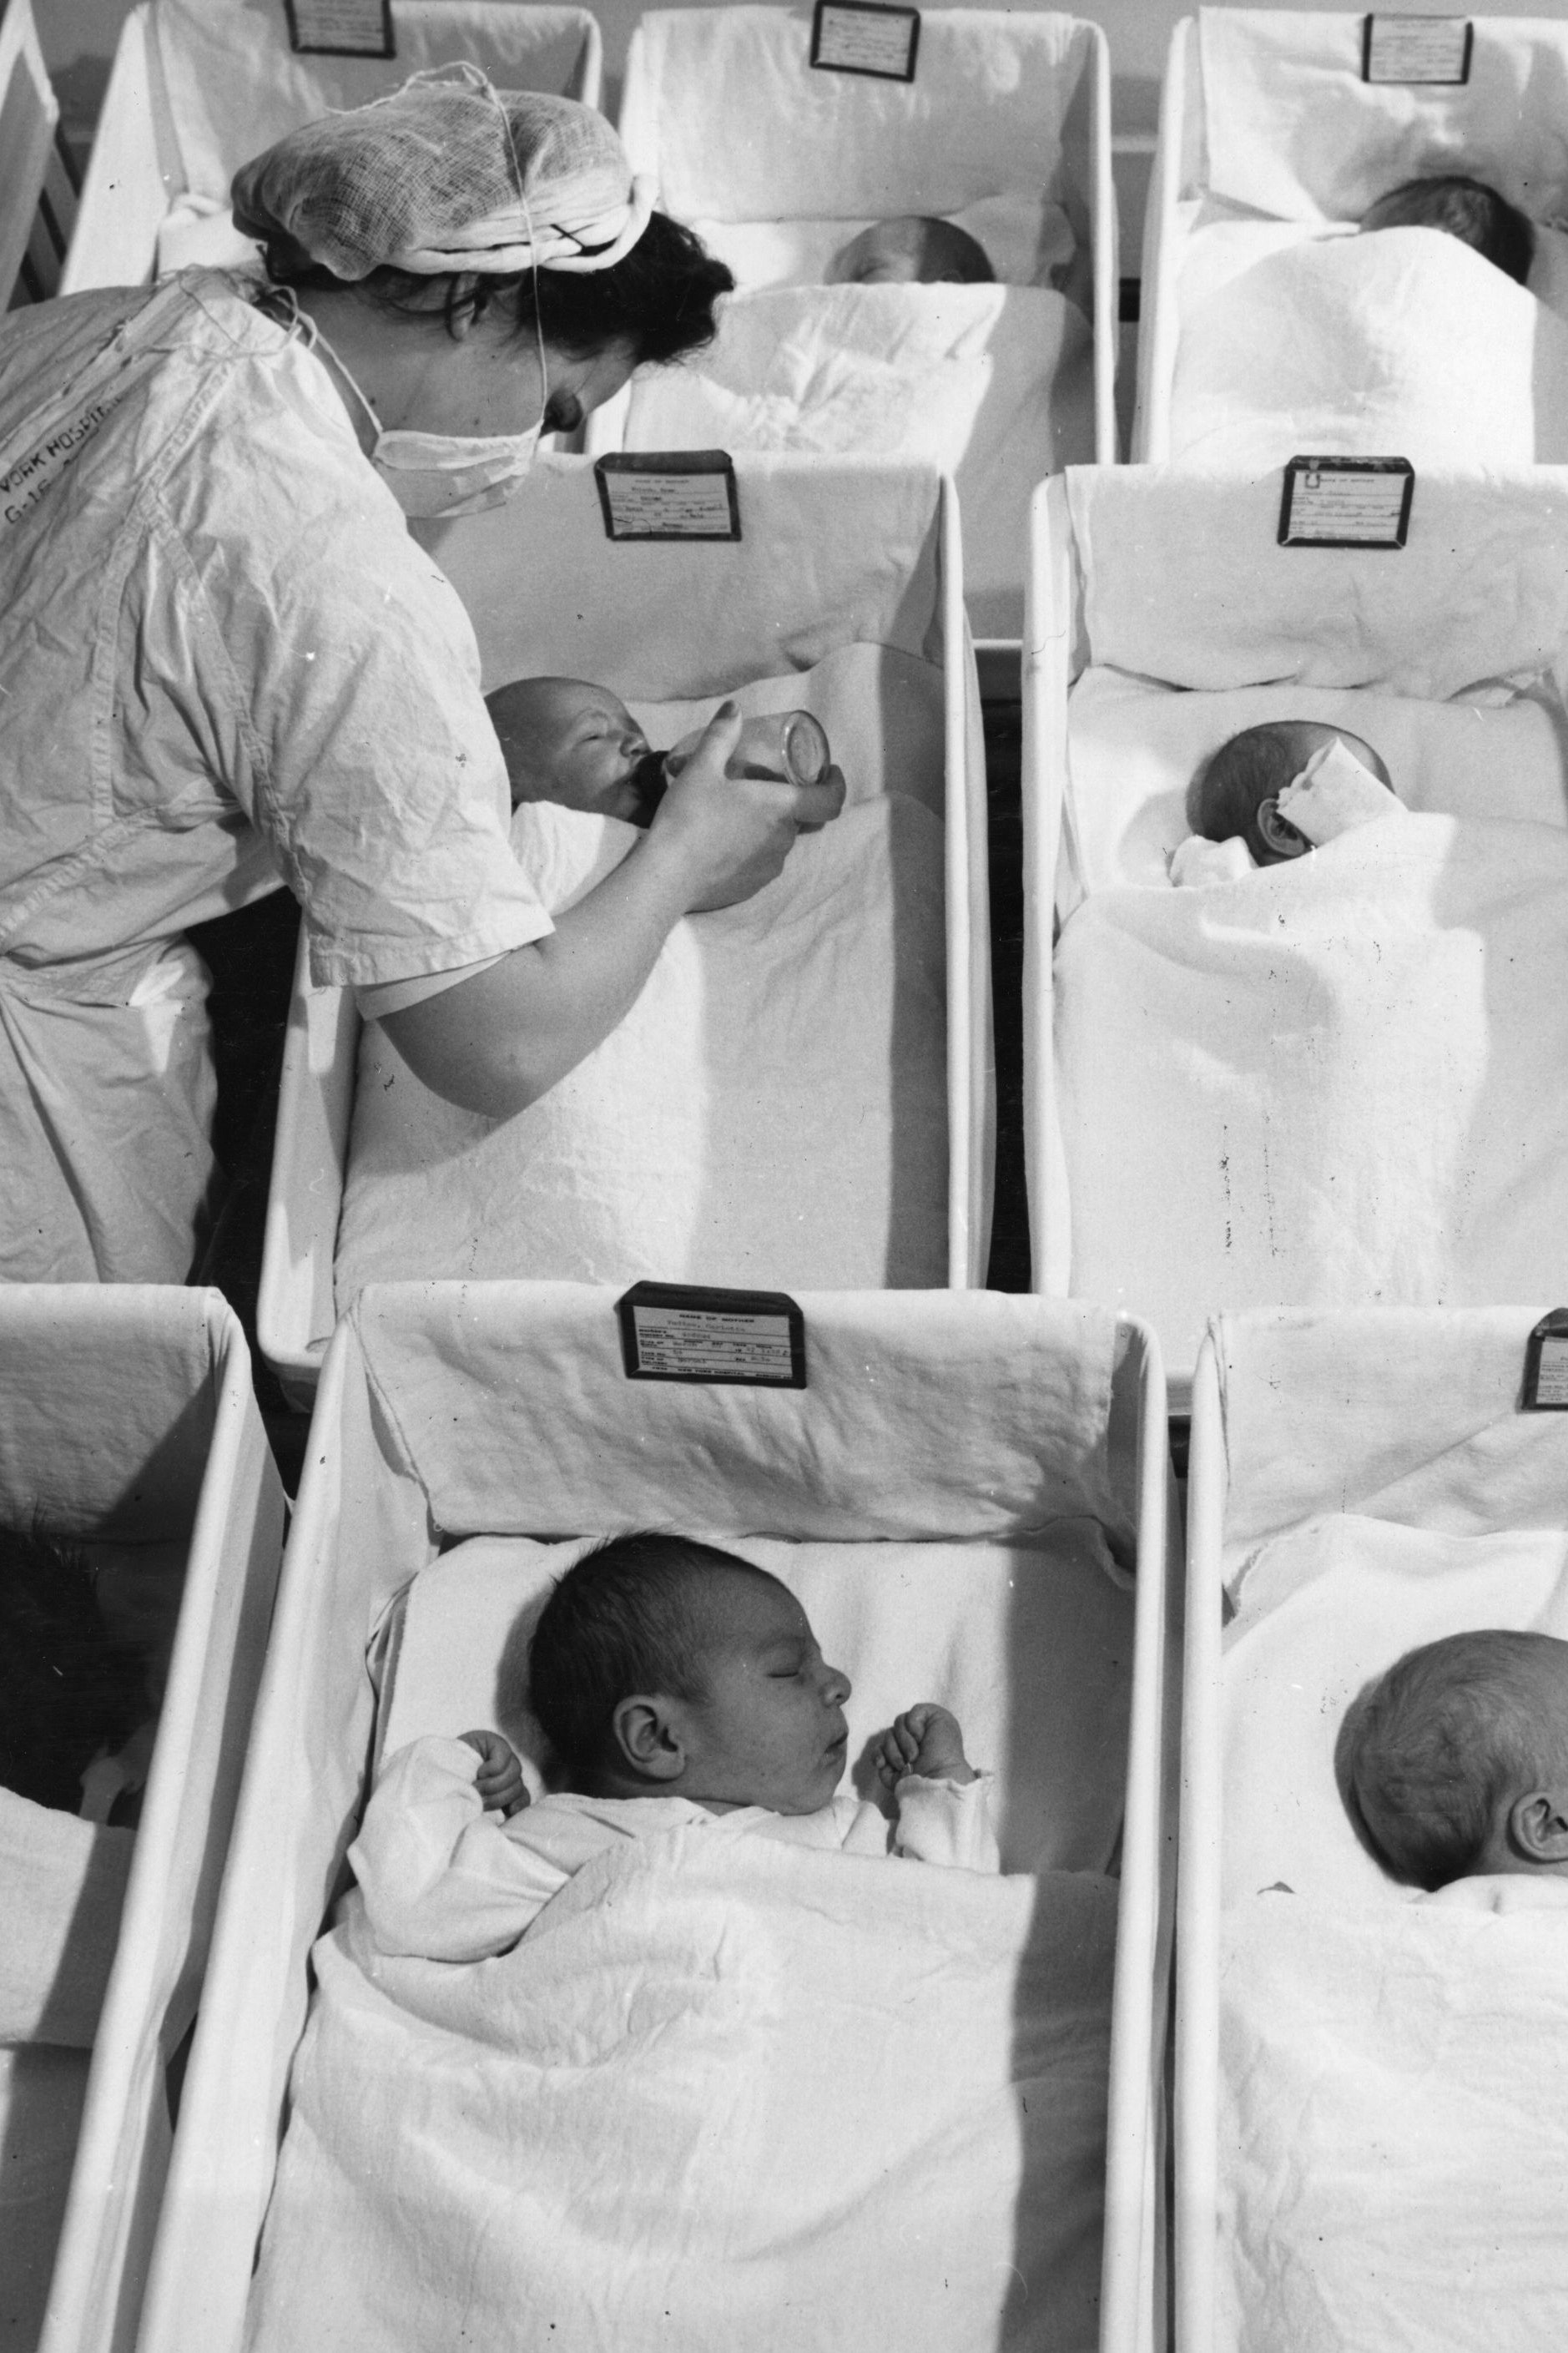 Rows of newly born babies in a maternity ward in a US hospital.